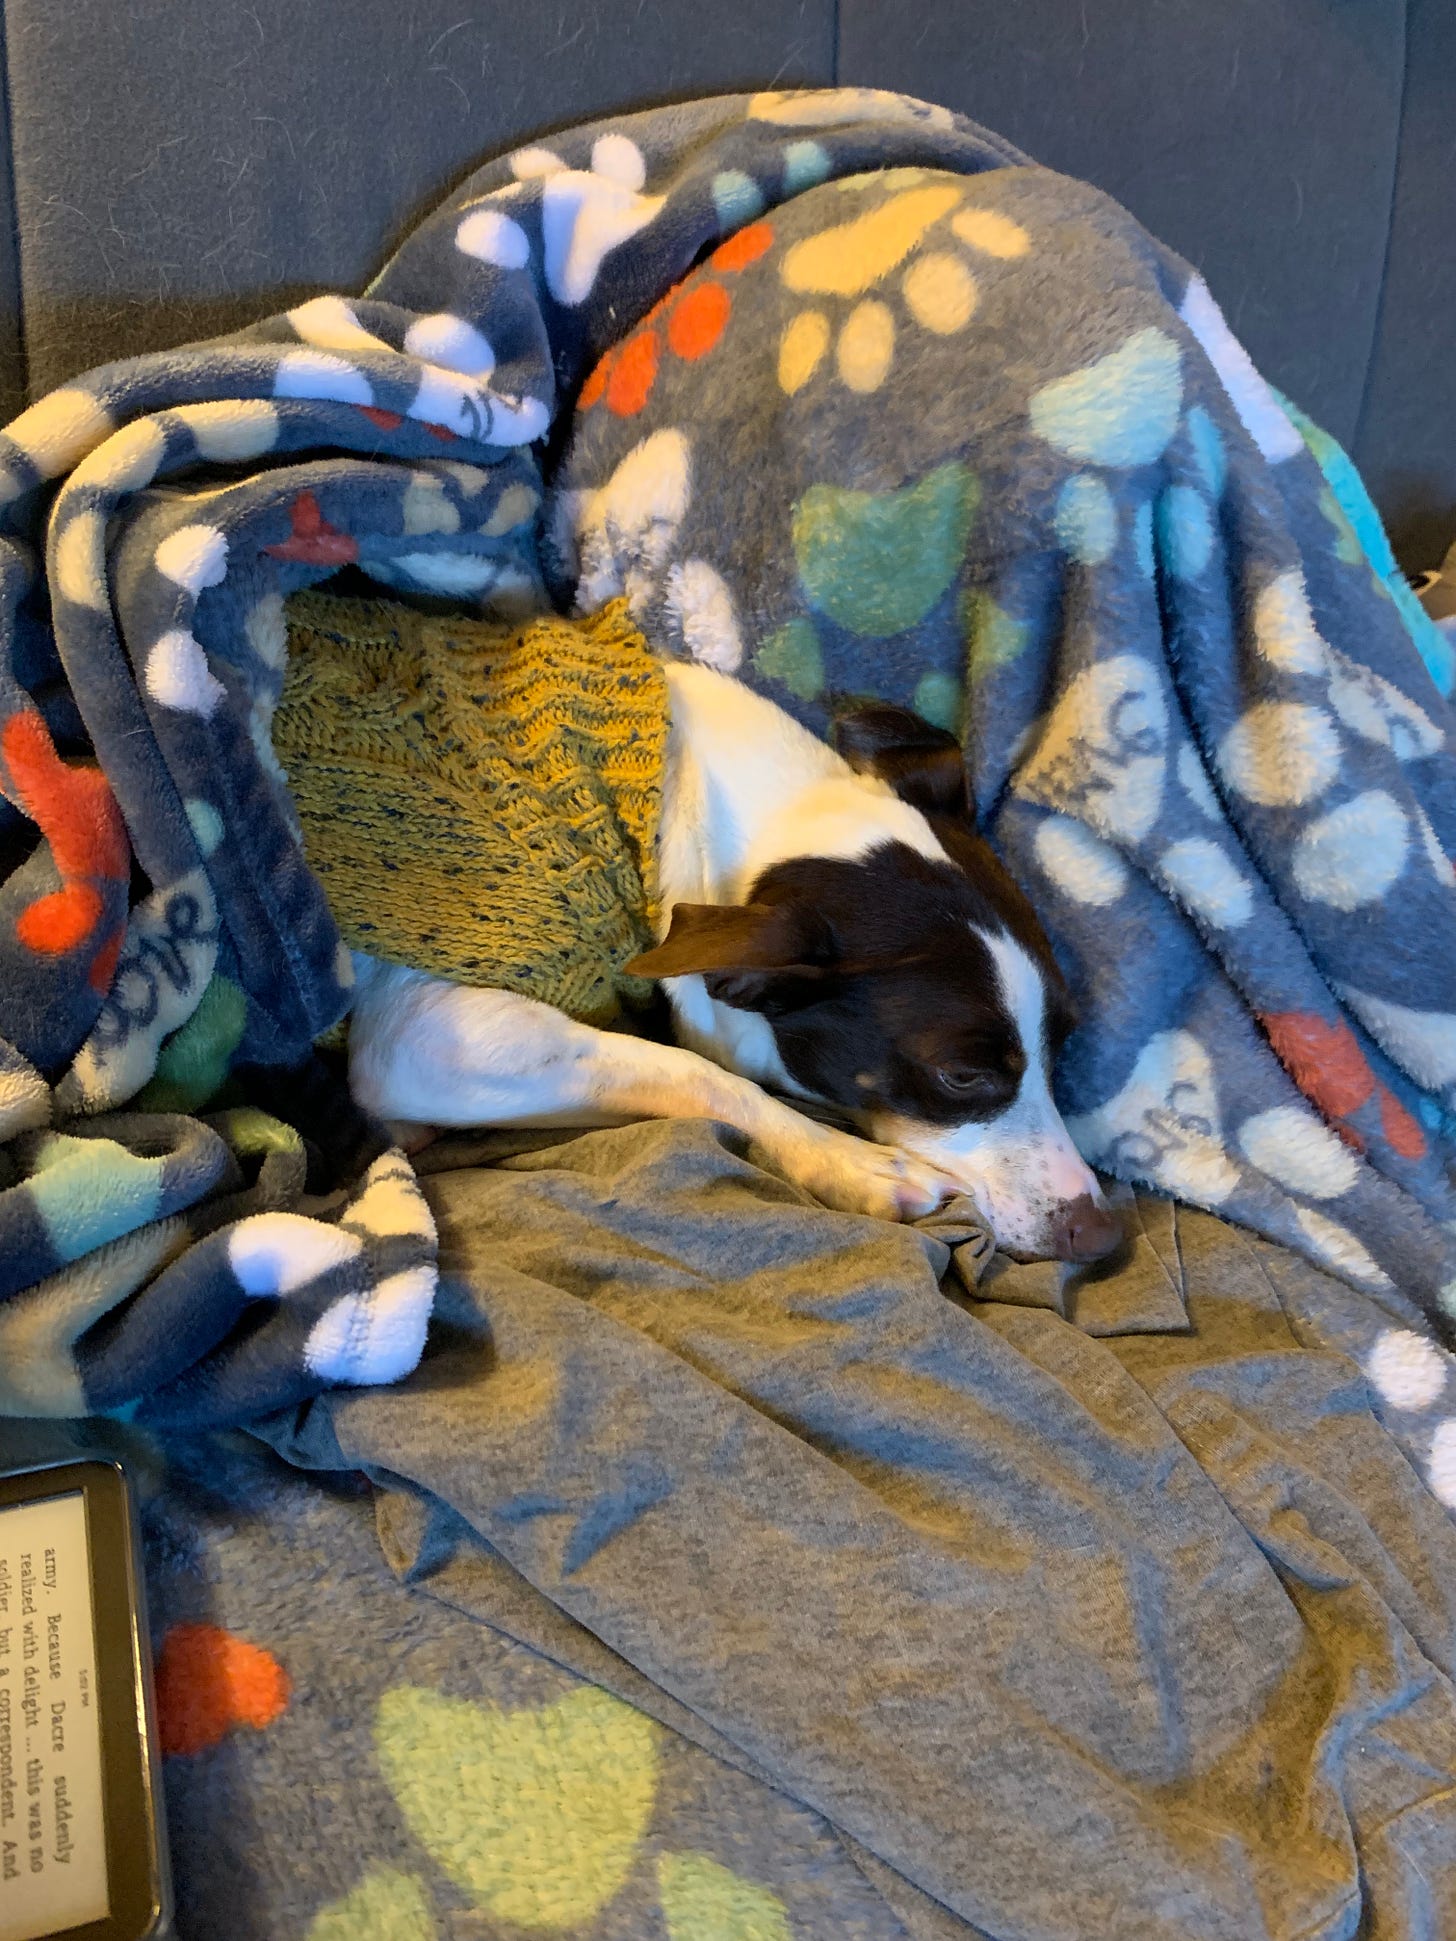 hazel, a small white dog with brown patches on her face, wears a yellow sweater and curled up under a blue and white blanket.